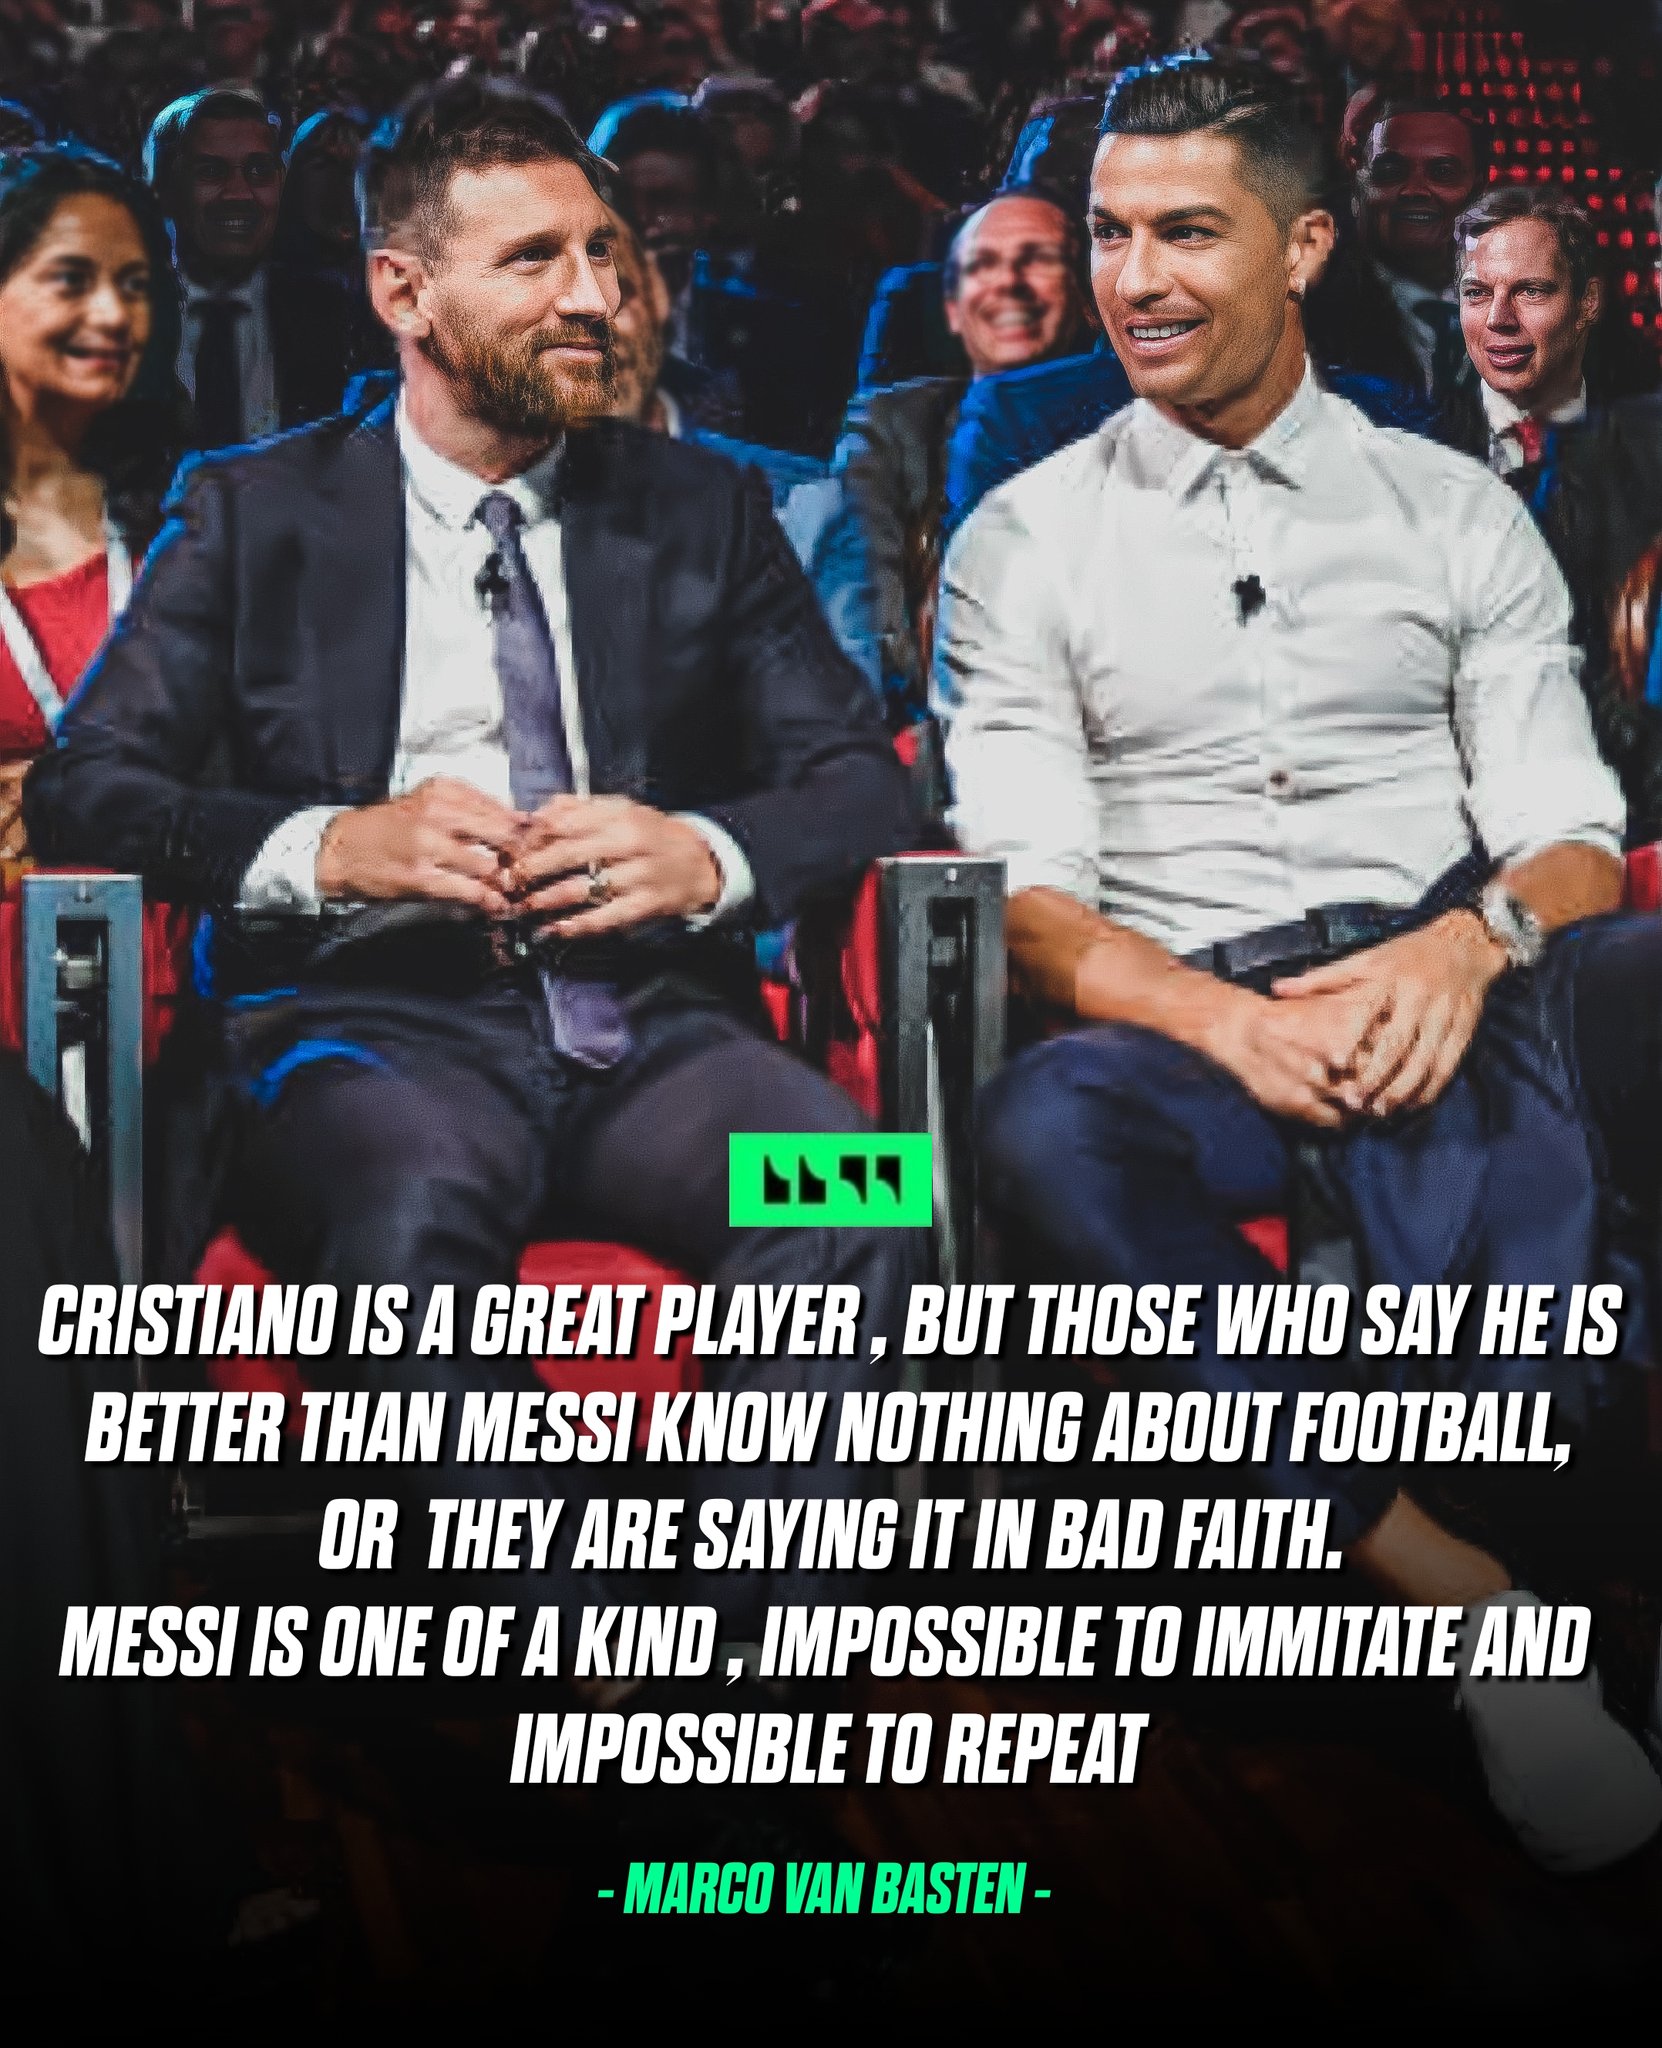 Team on Twitter: "•🗣Van Basten: "Those who think Ronaldo's better than Lionel Messi know nothing about football." https://t.co/Yp0HP6ocXG" / Twitter